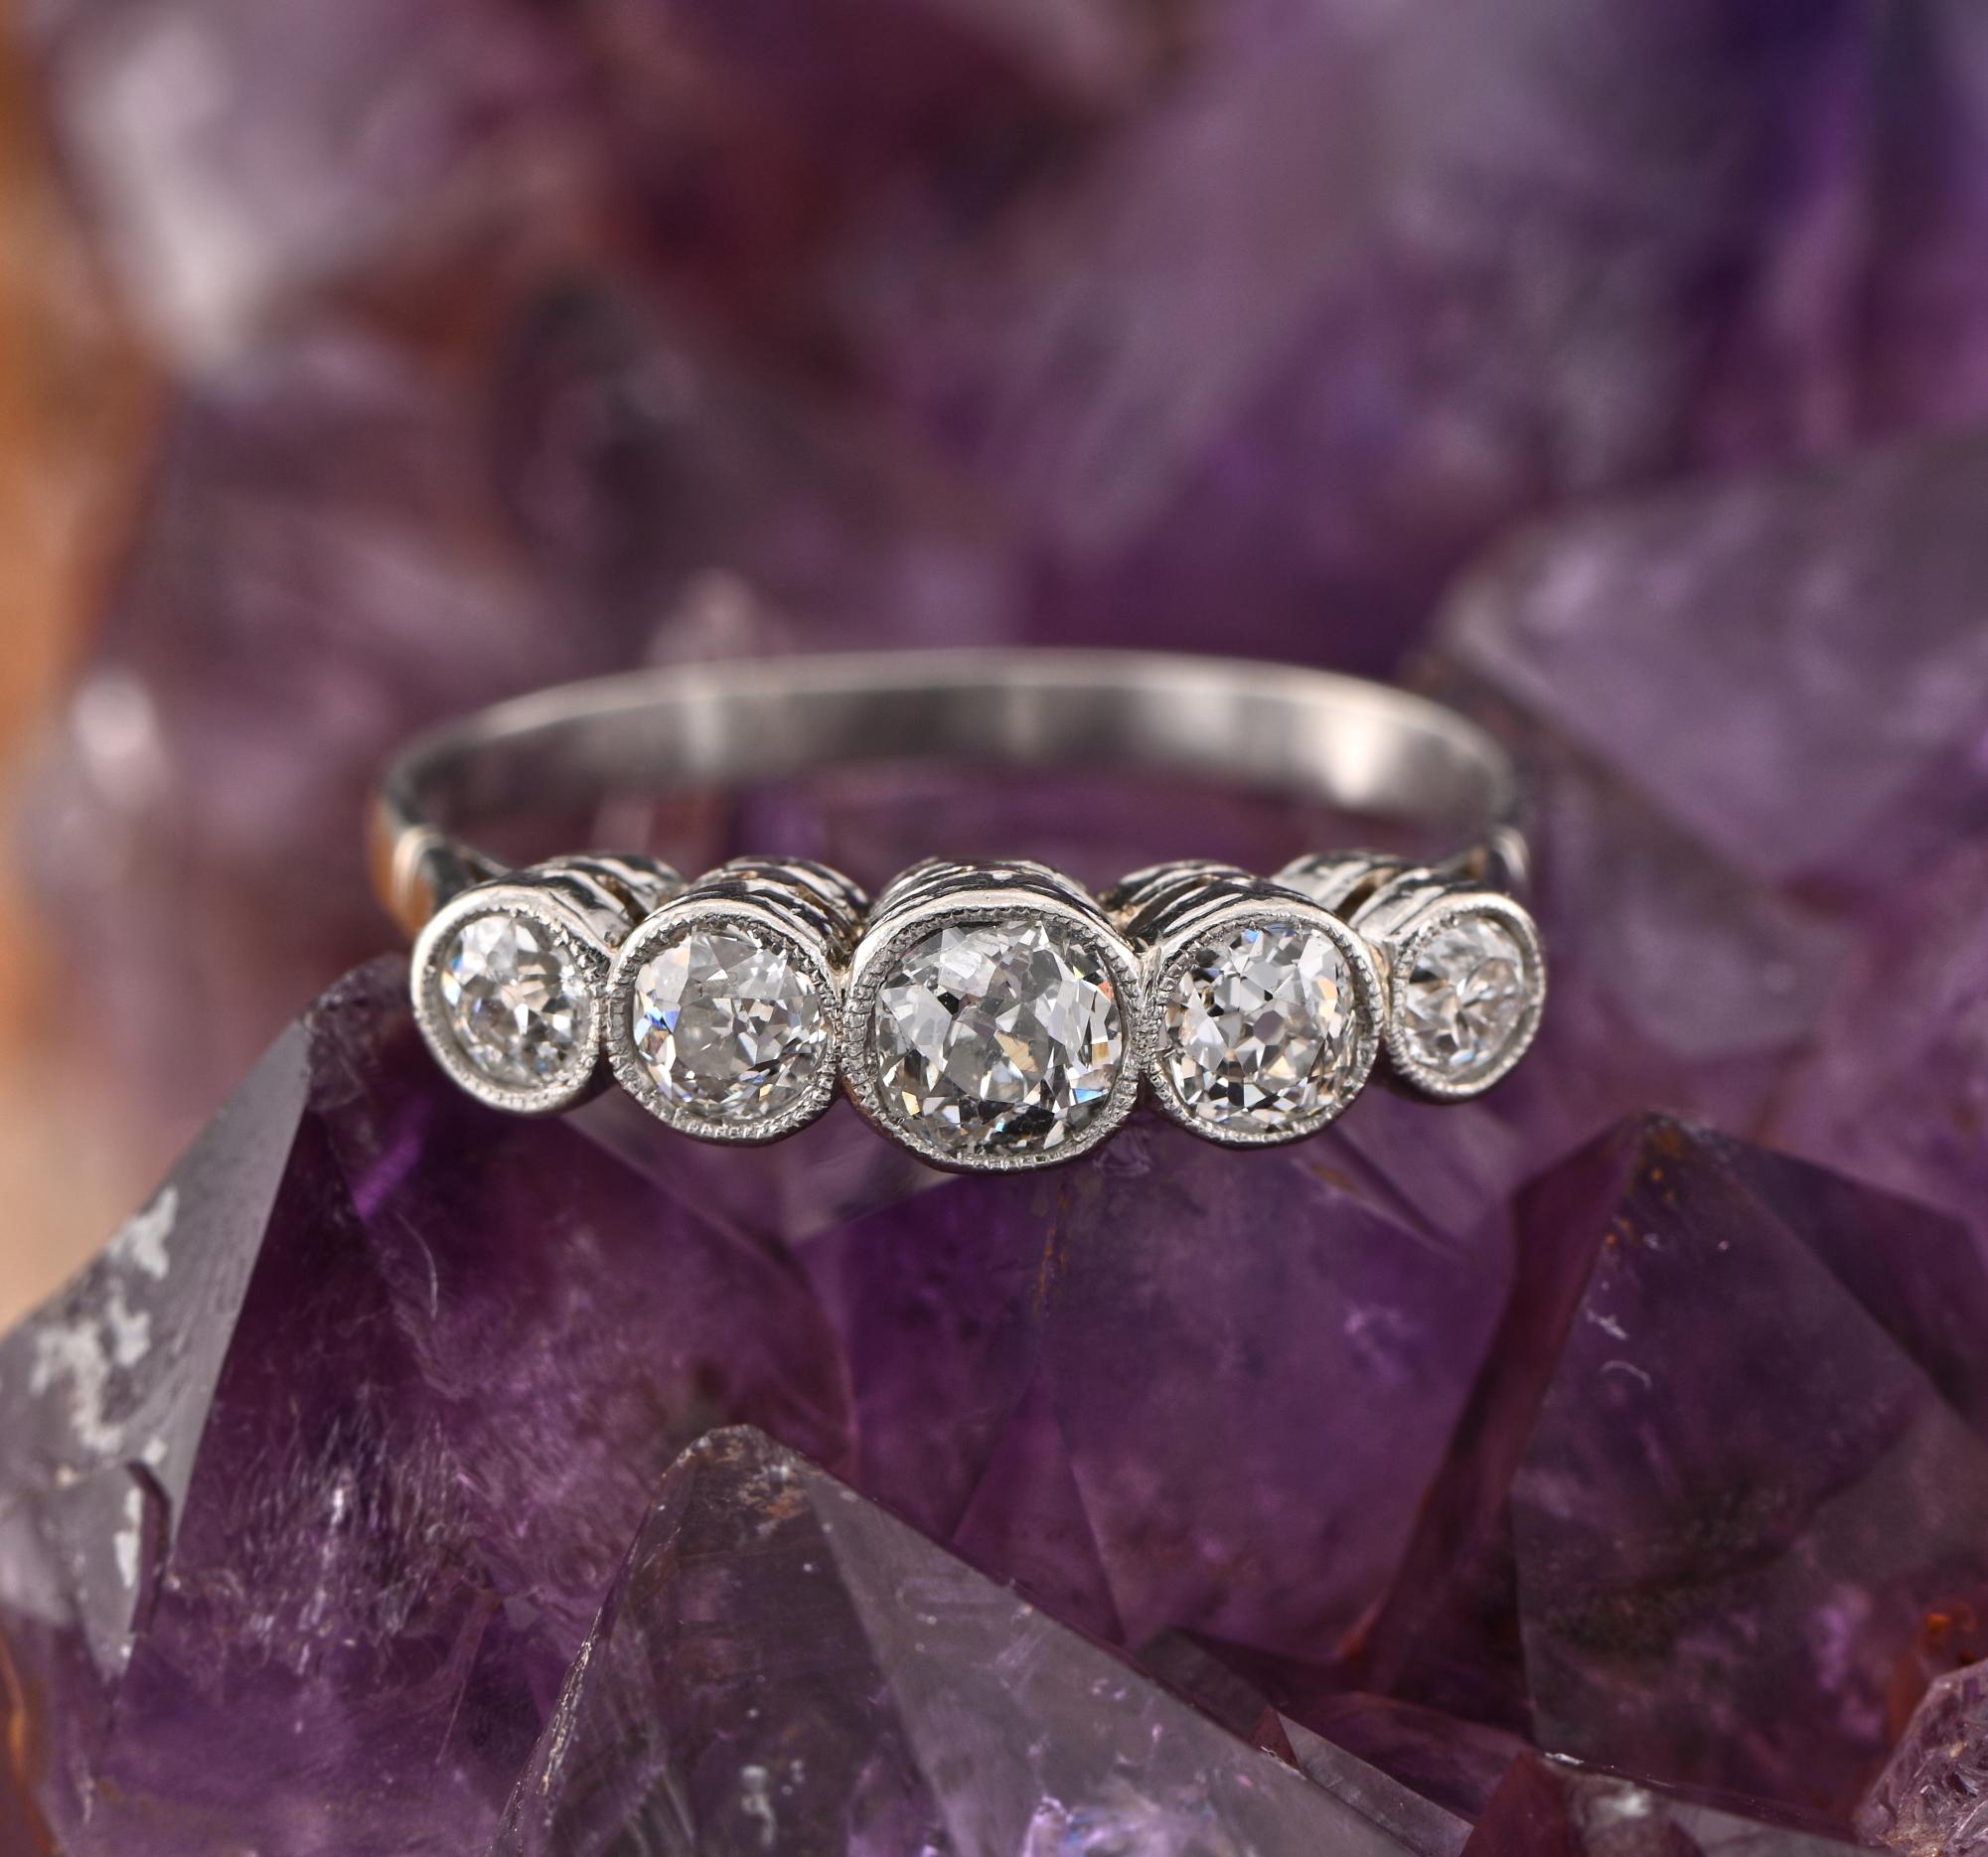 Classy Antique Five Stone!
This charming five stone Diamond ring is purely Edwardian period
Exquisitely hand created mount made from solid Platinum, marked
The ring stands up with an array of five graduated Cushion old mine cut Diamonds, chunky and